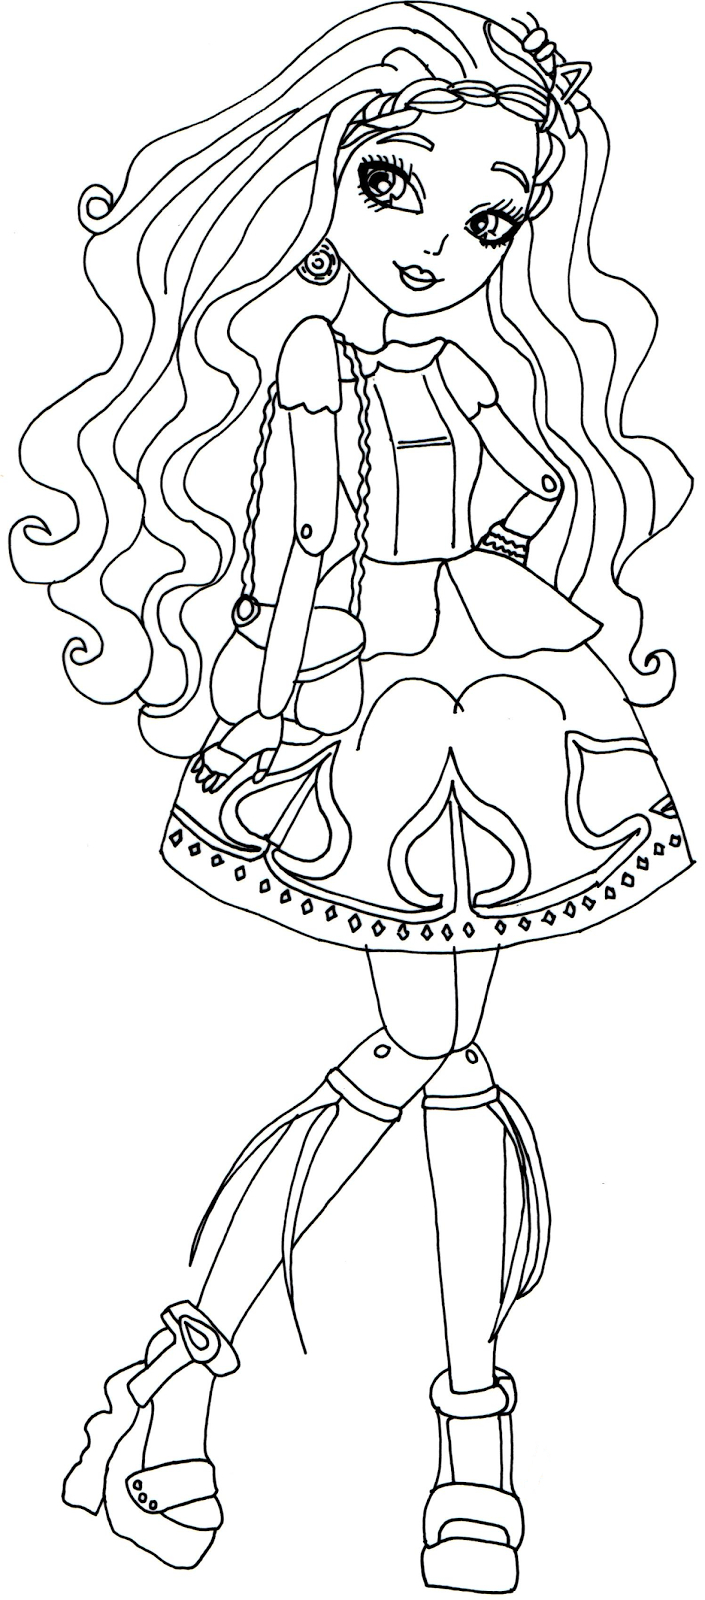 Rainbow High Coloring Pages Free Printable / Rainbow Brite Coloring pour Dessin A Imprimer Rainbow High